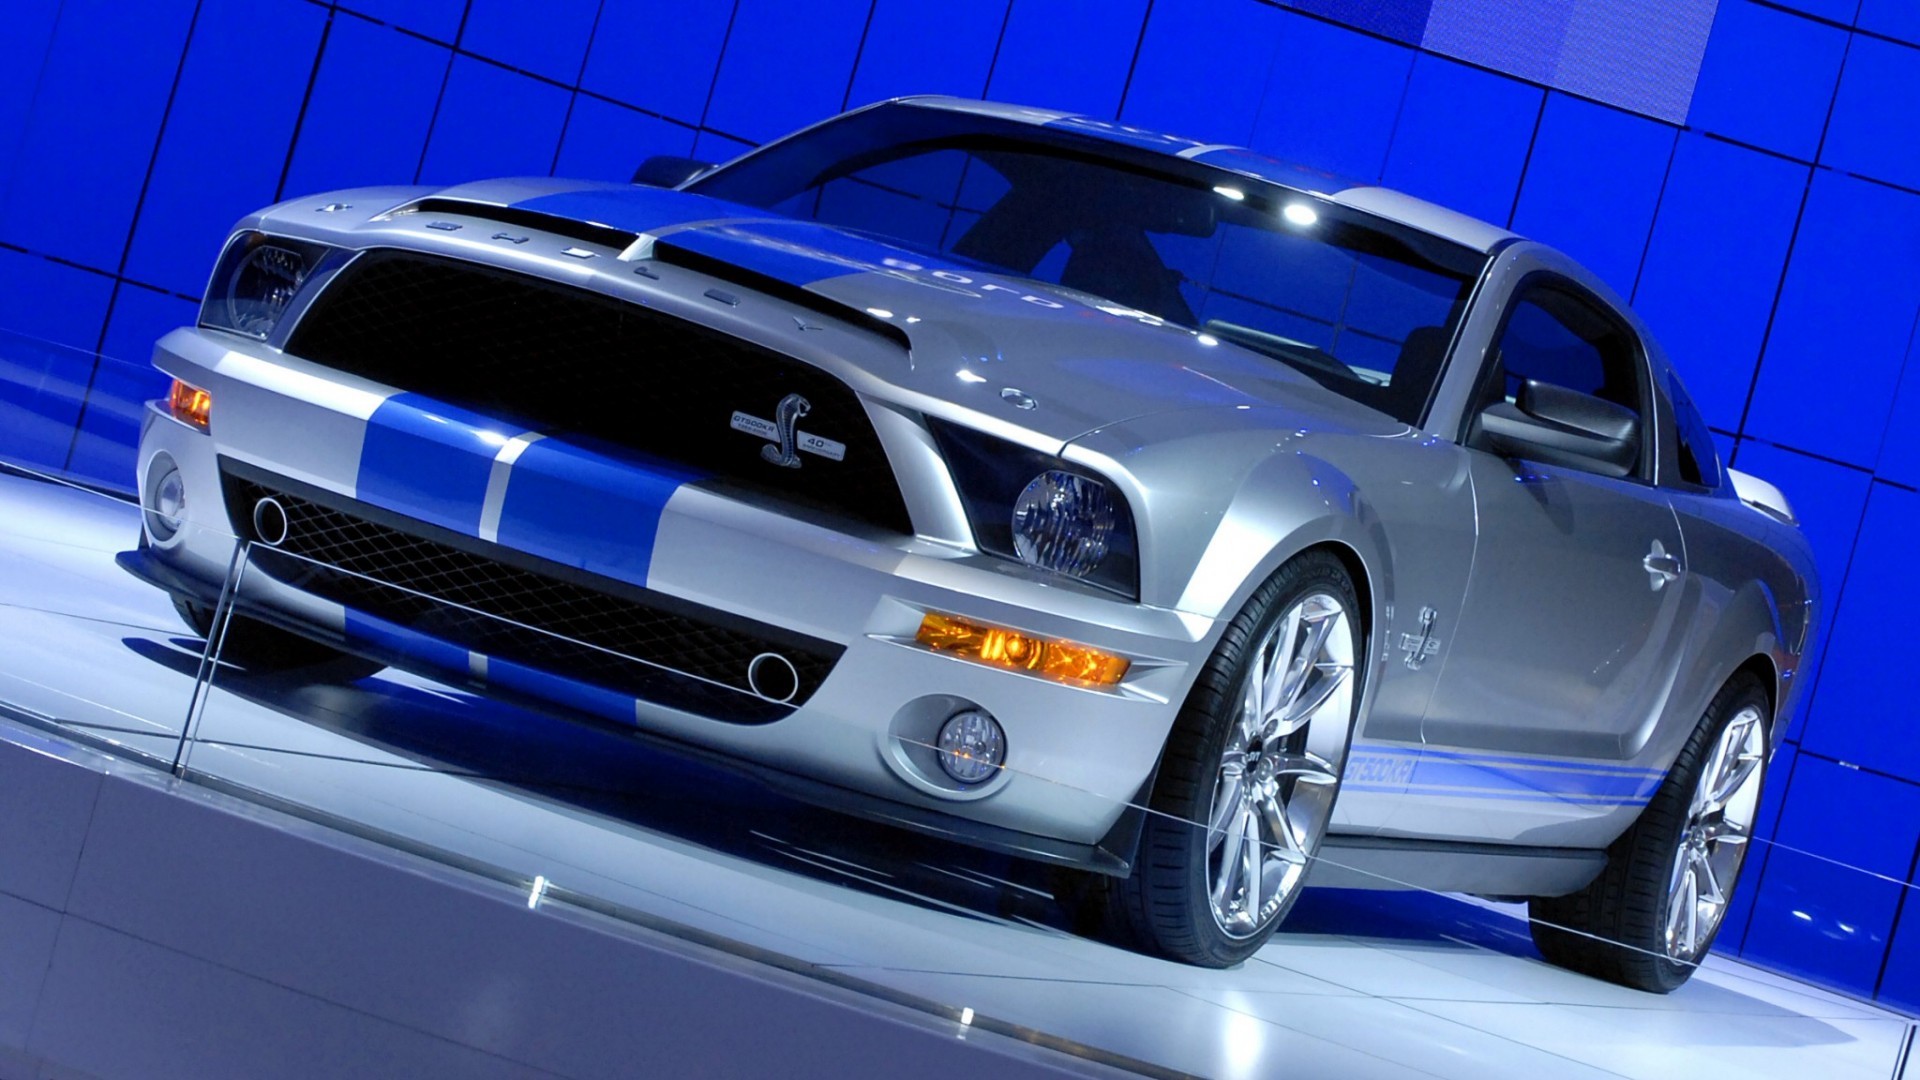 blue, Cars, Vehicles, Ford, Mustang Wallpaper